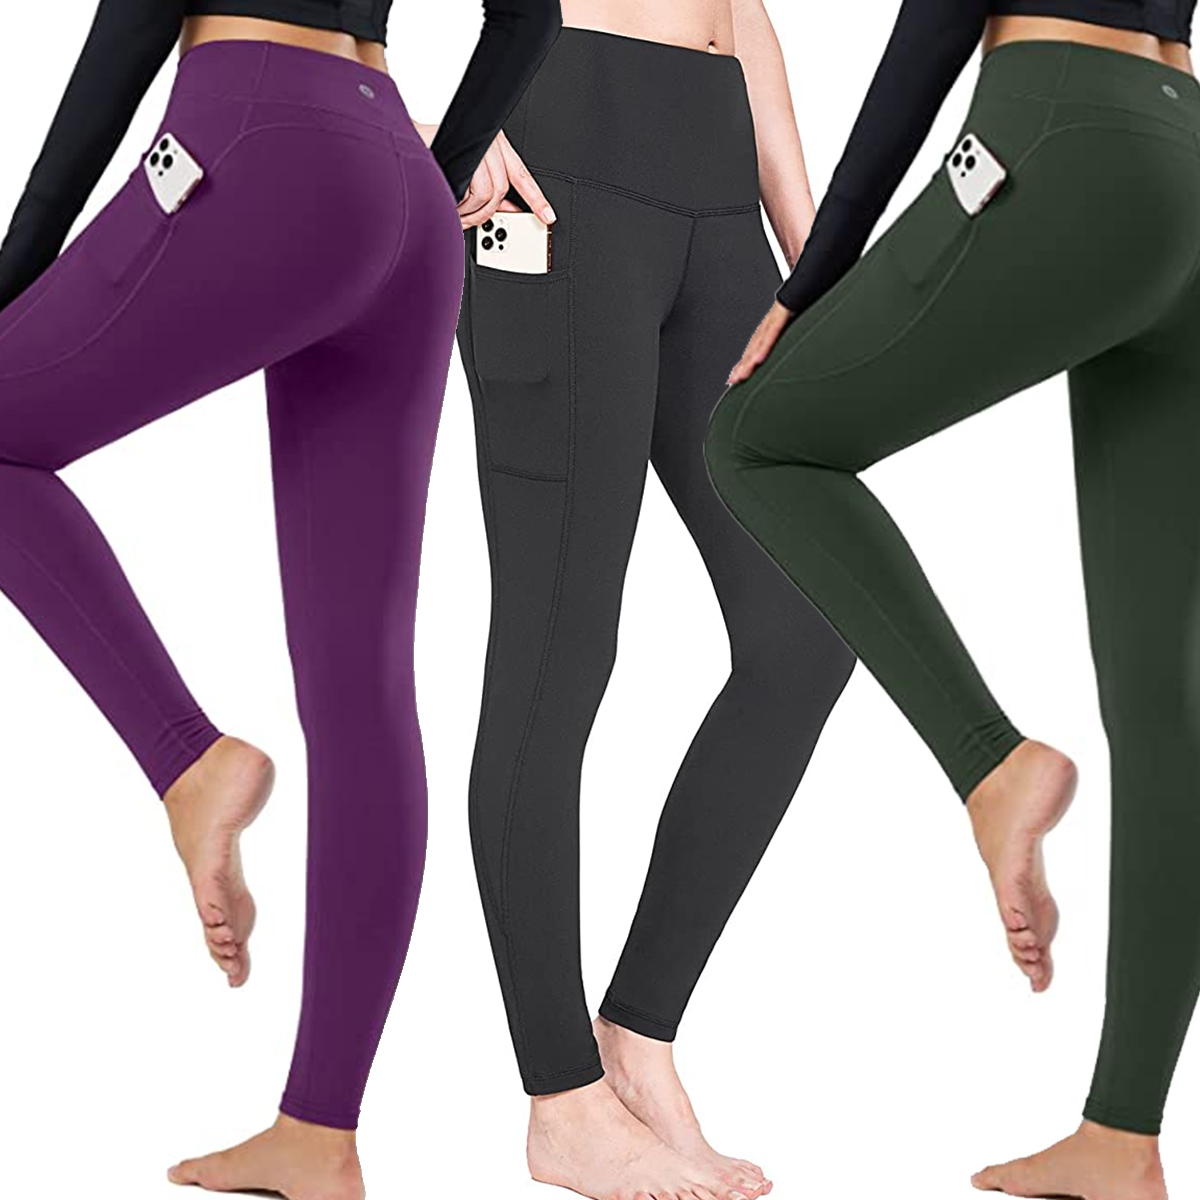 Comprar Syrinx 3 Pack Fleece Lined Leggings Women with Pockets